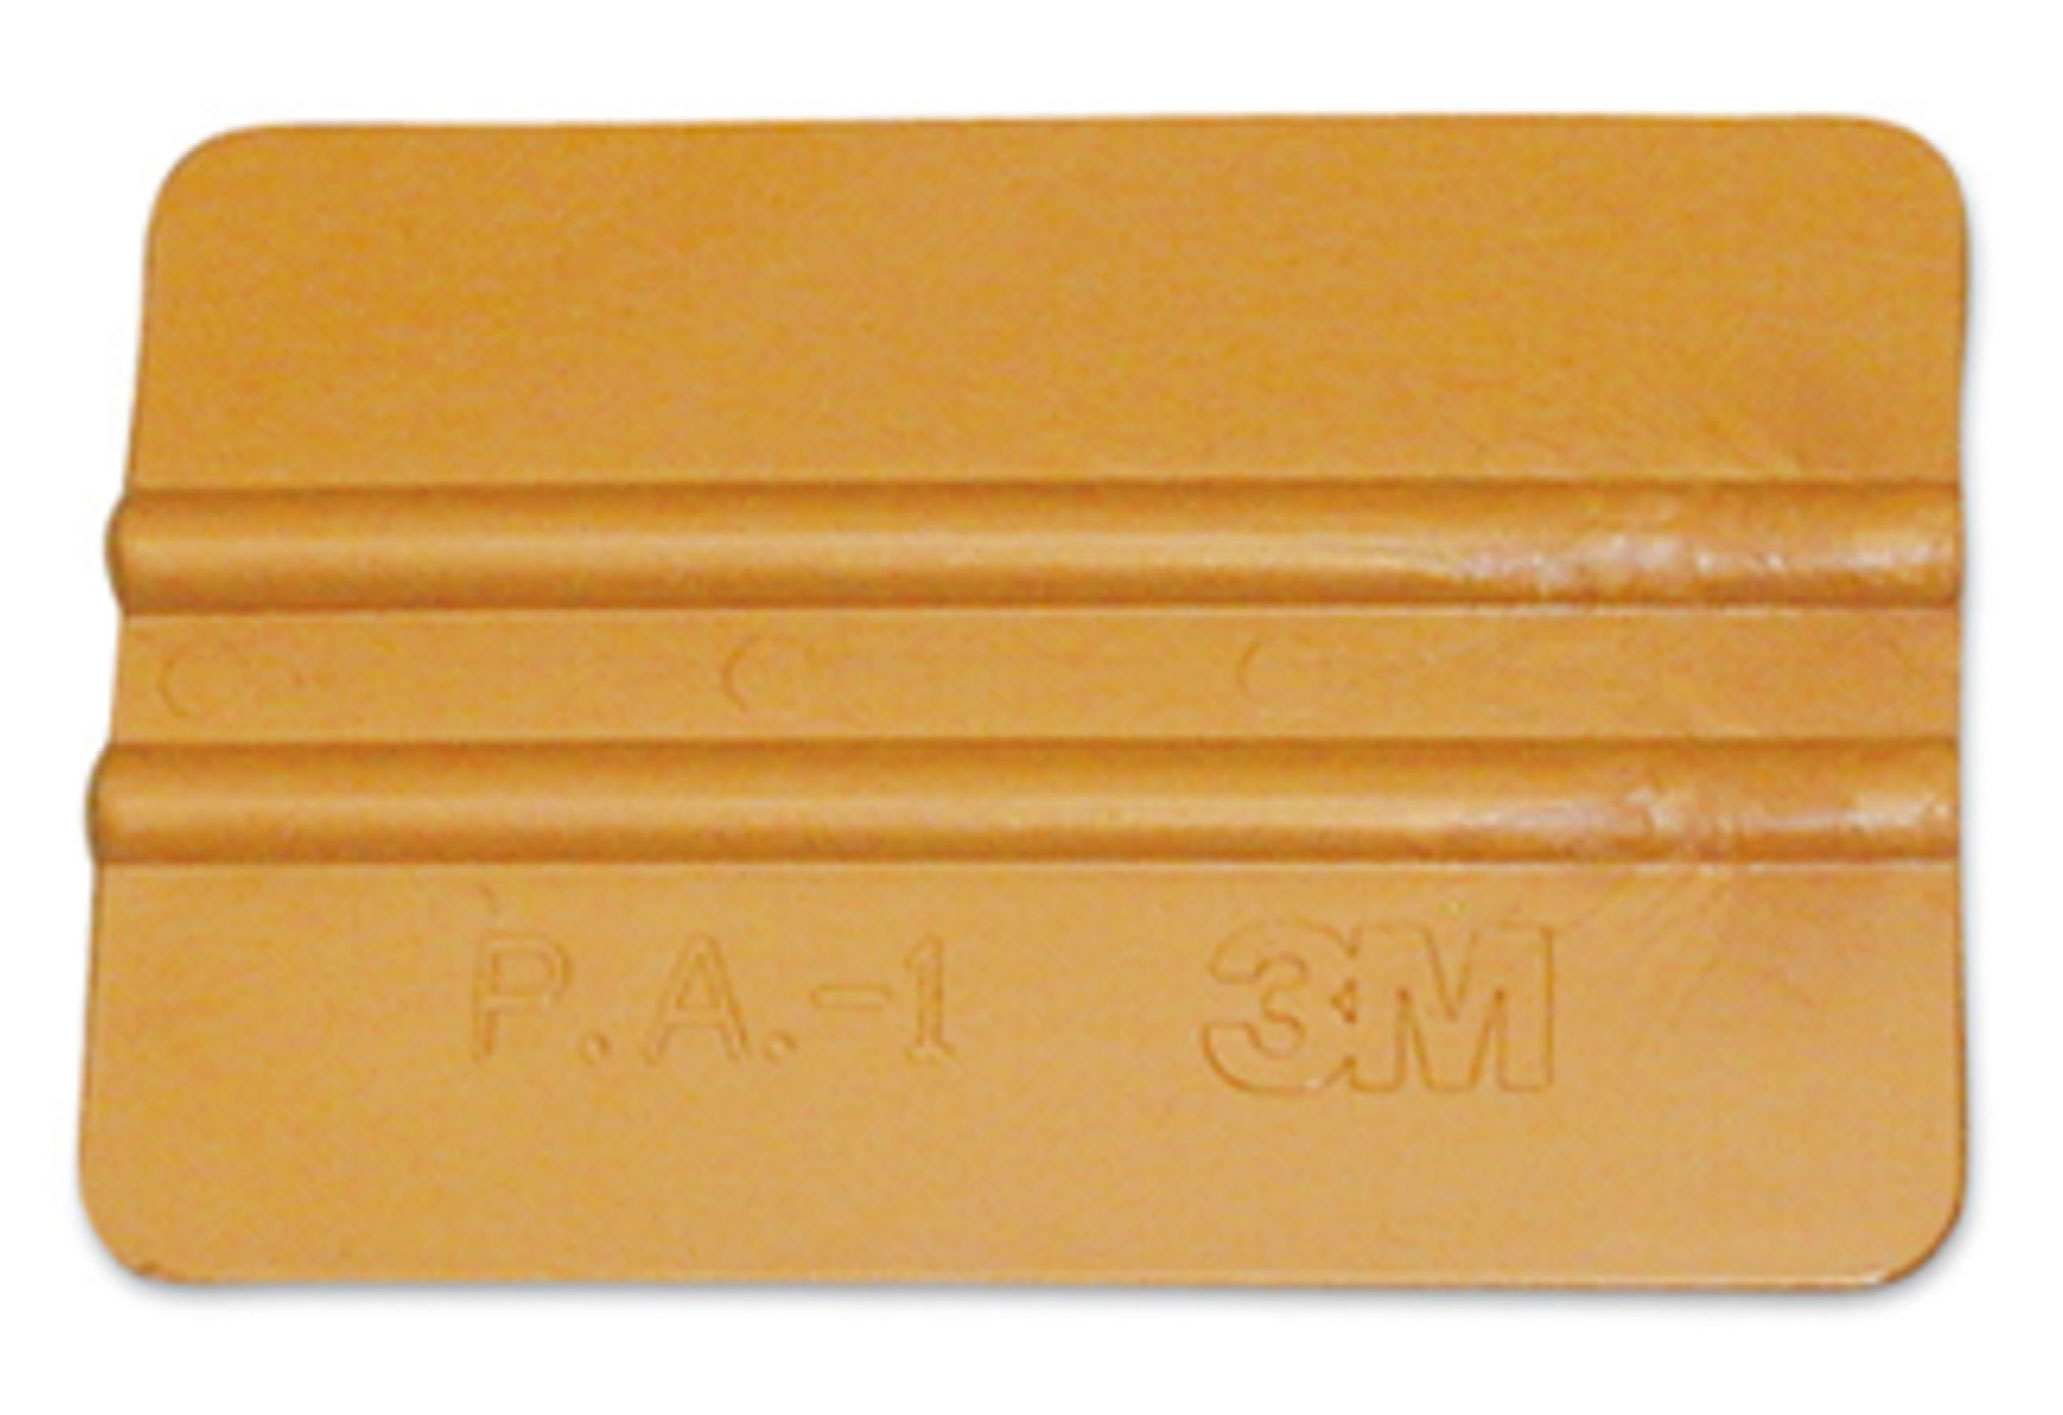 Shop 6 Pk 3M PA-1 Gold Application Squeegee